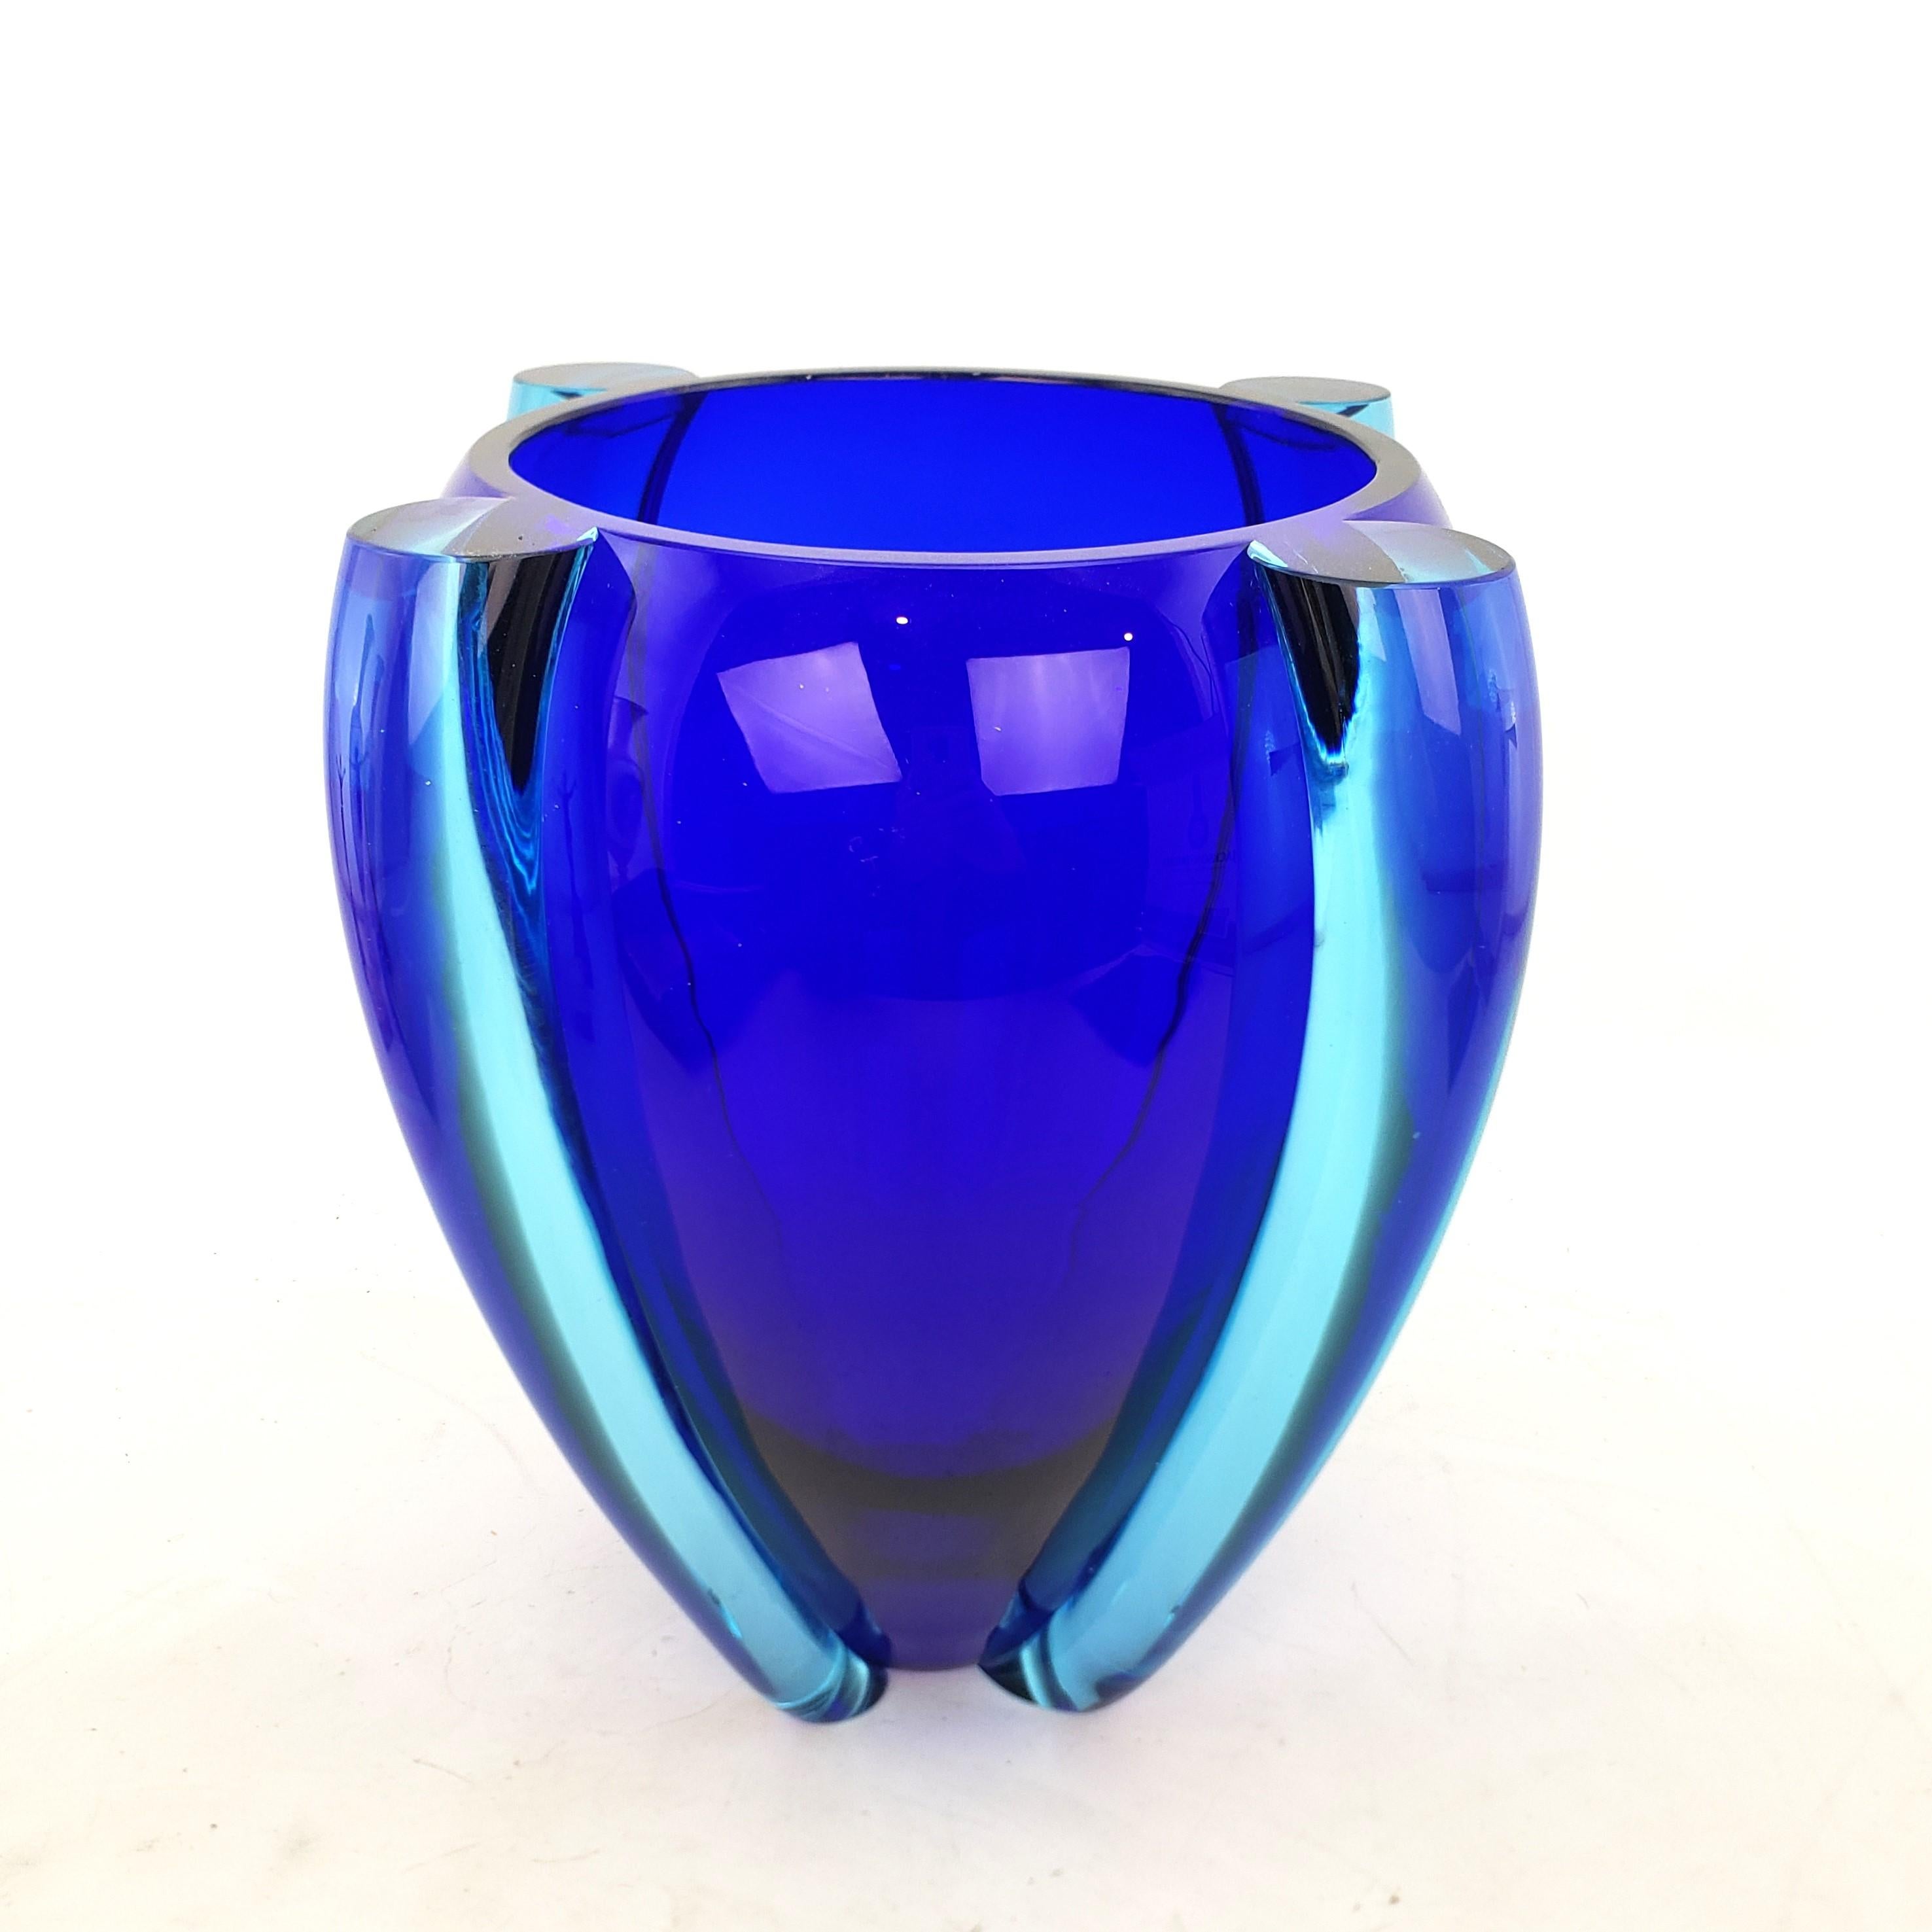 This large art glass vase is signed by an unknown artist,  and presumed to have originated from Italy and date to 1989 and done in a Mid Century Modern style. The vase is composed of a large cobalt blue  center with thick turquoise or acqua blue